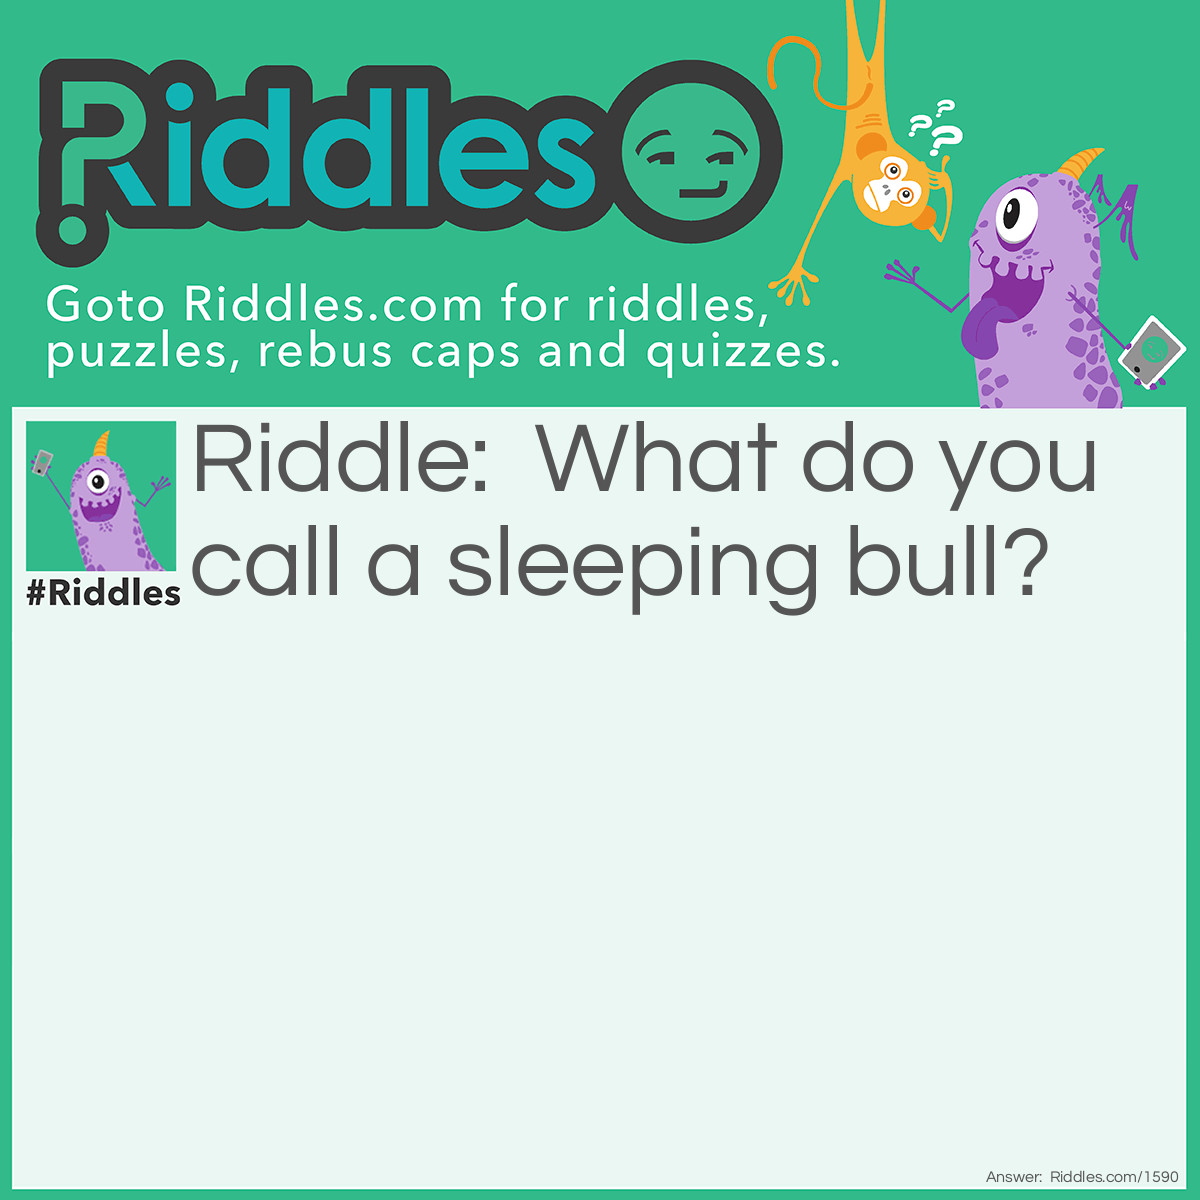 Riddle: What do you call a sleeping bull? Answer: A bulldozer!